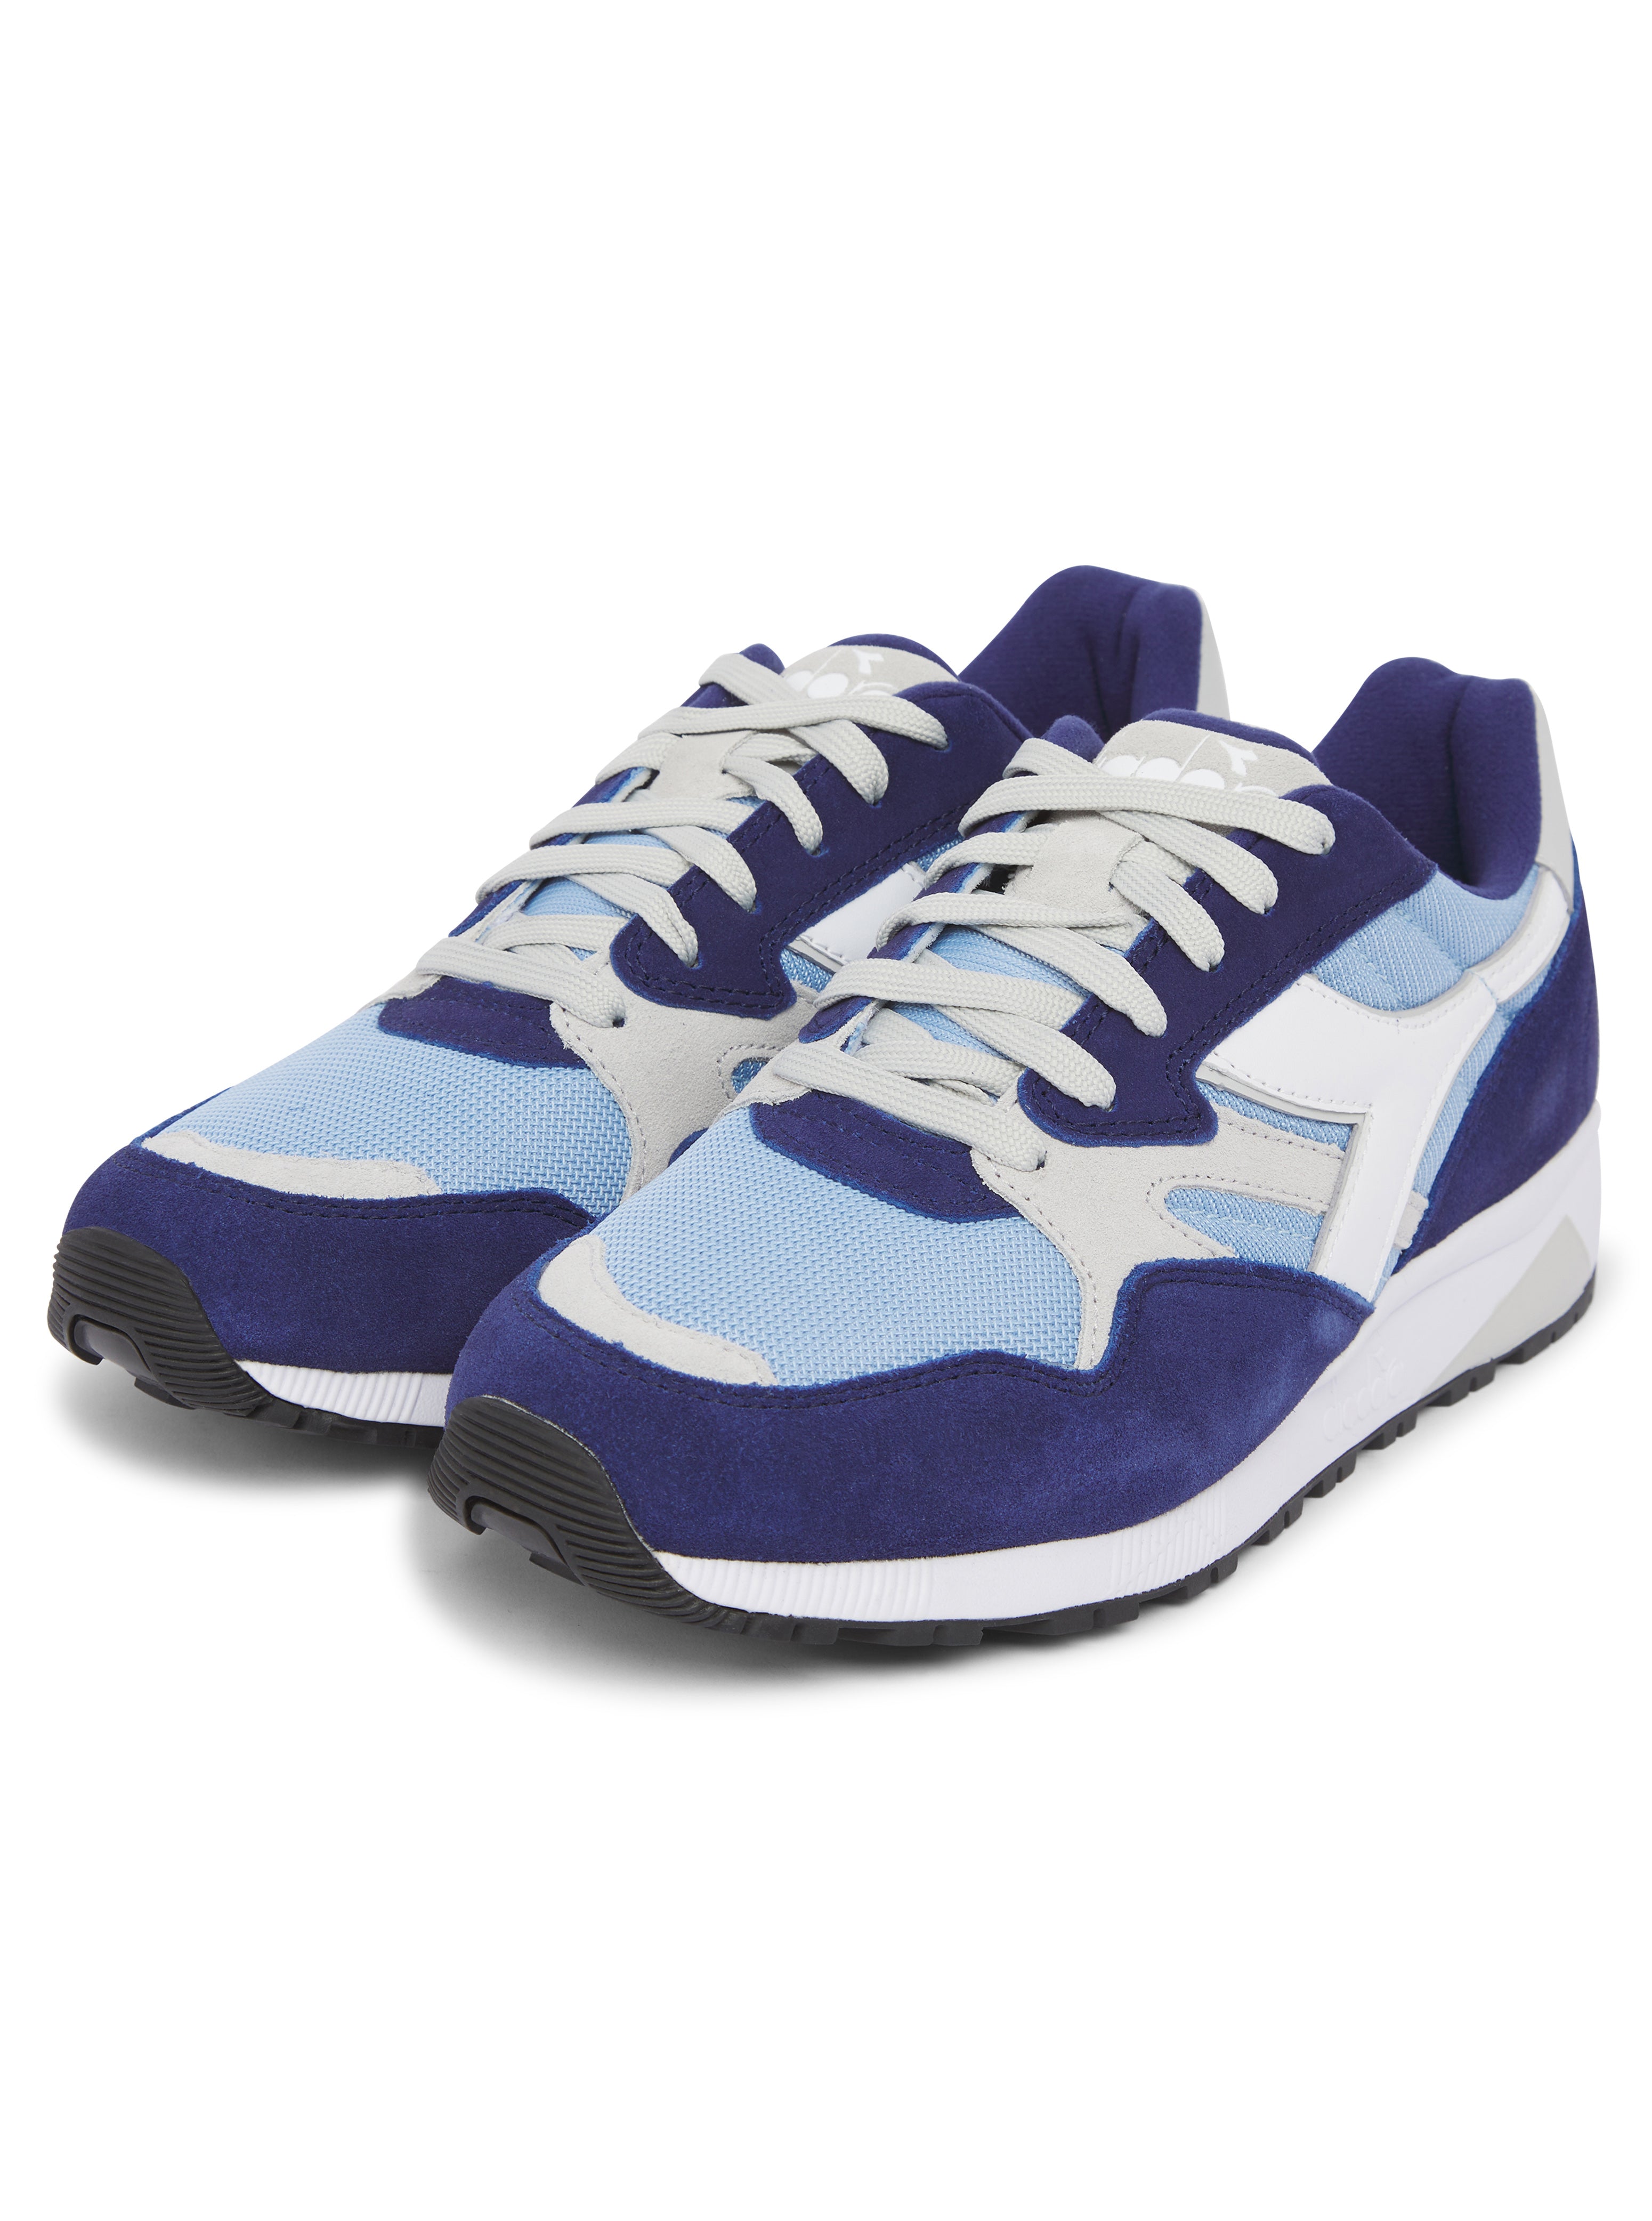 Load image into Gallery viewer, Diadora N902 Trainer Blue
